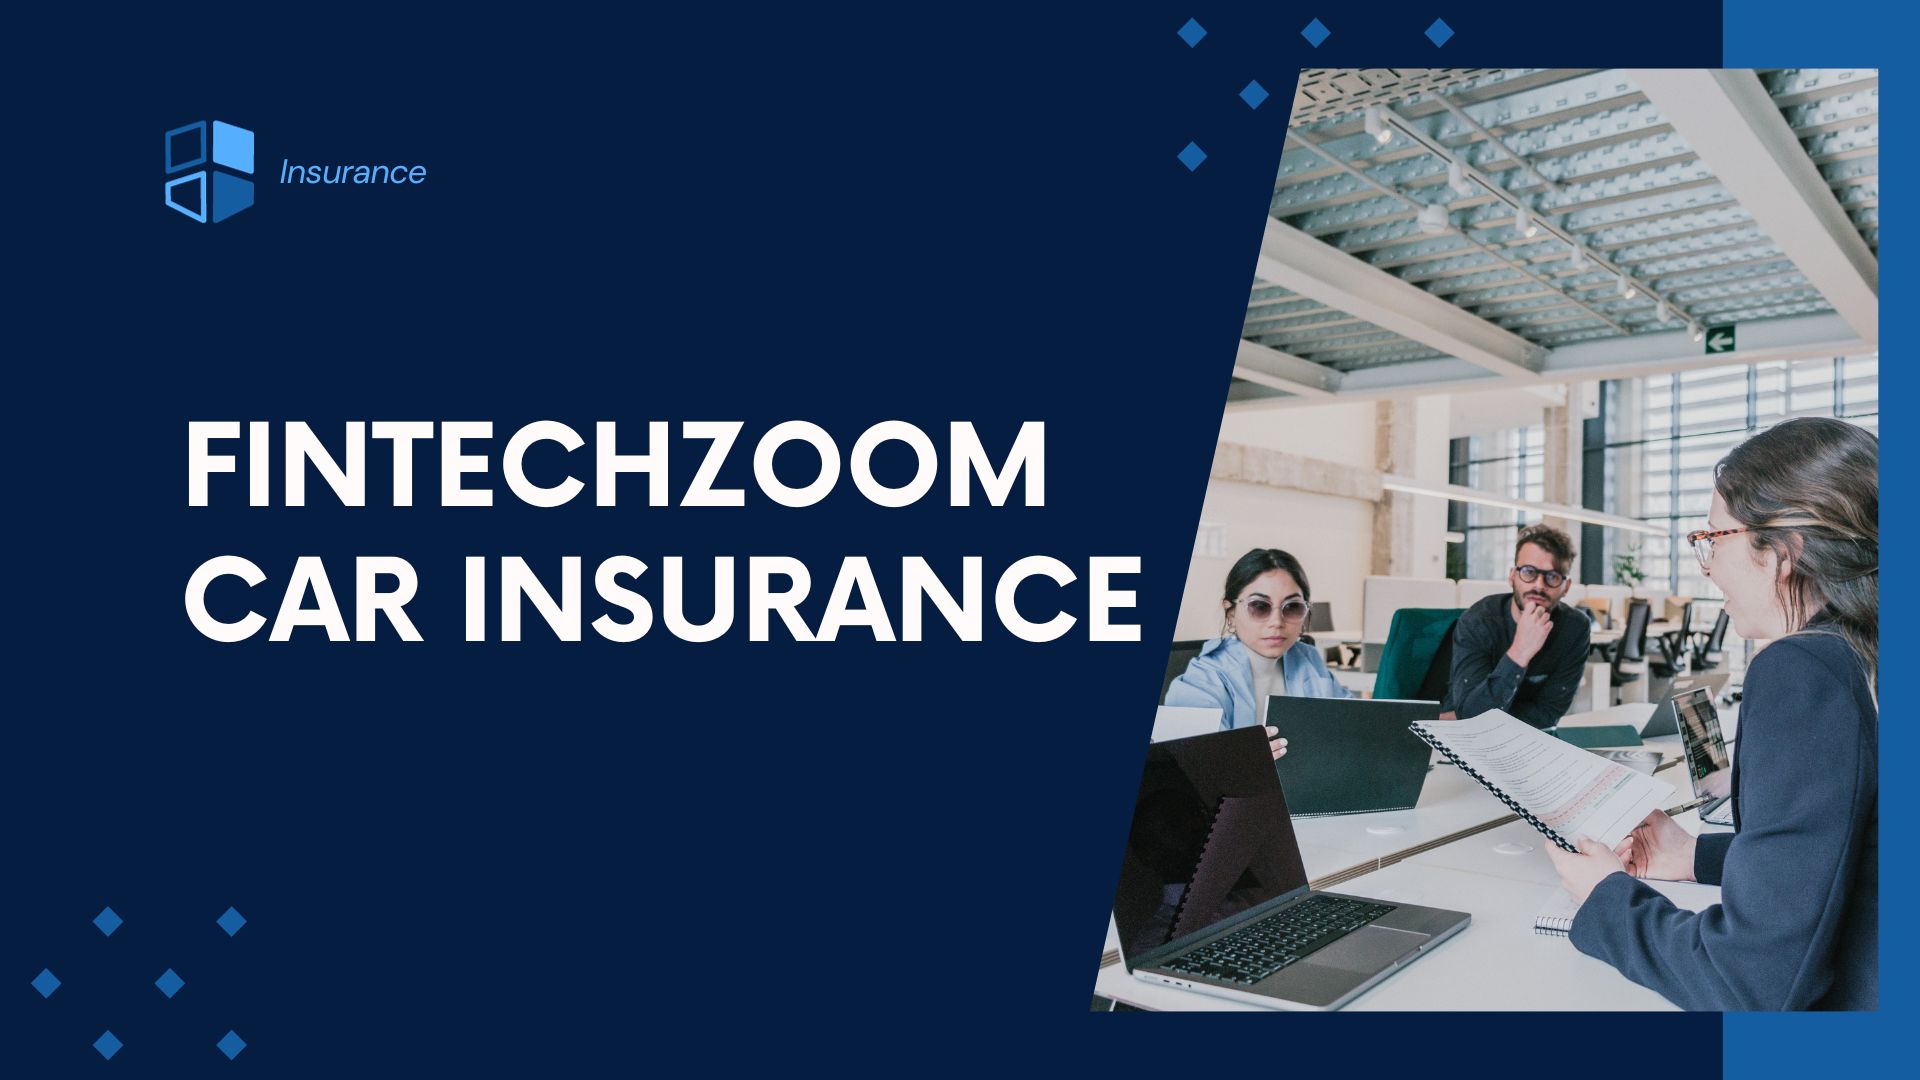 You are currently viewing Fintechzoom Car Insurance